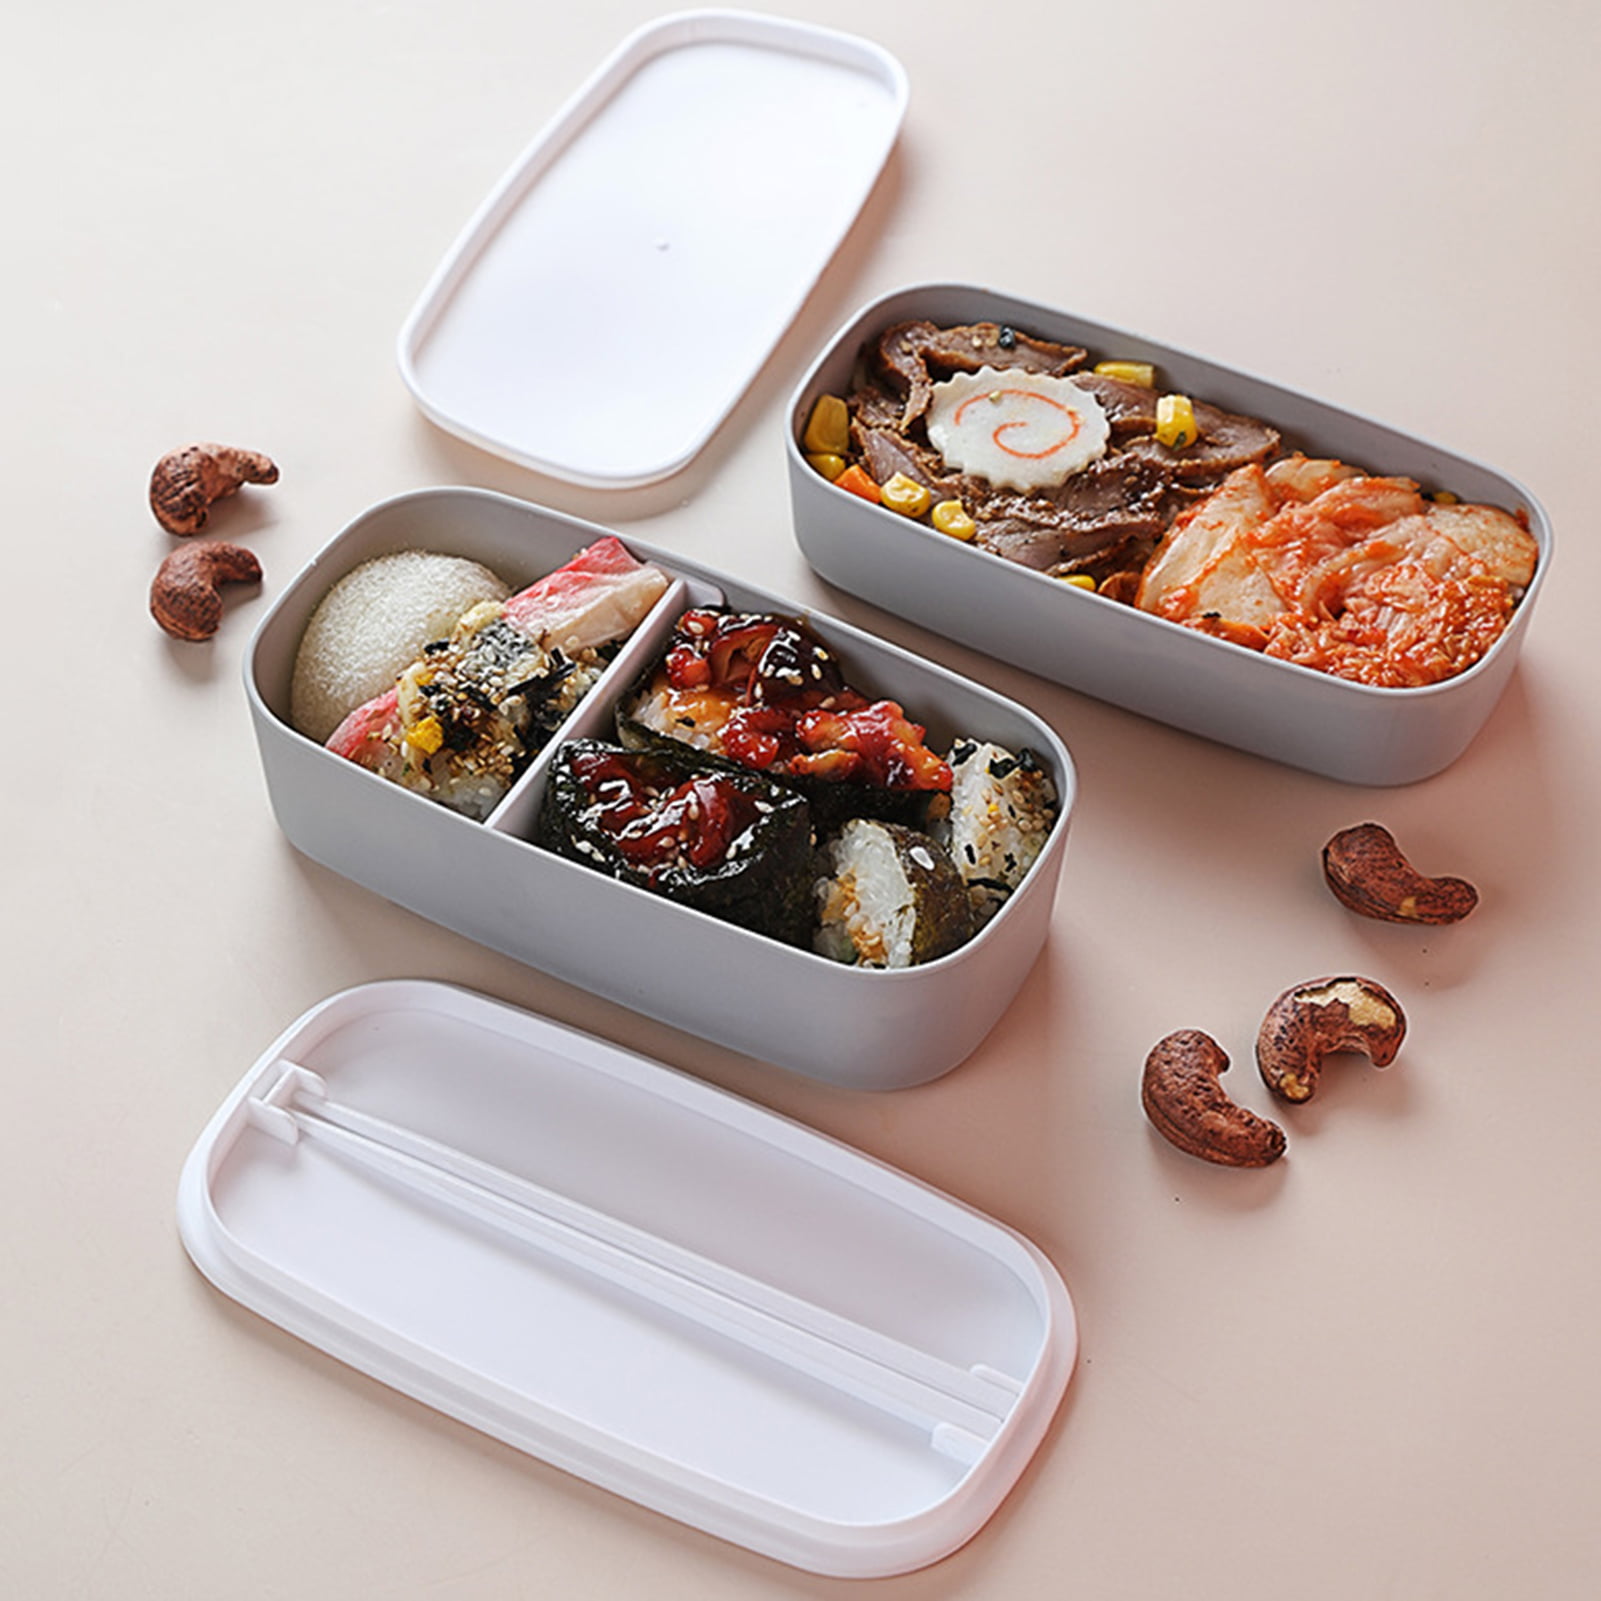 Stylish and Cute Octopus Bento Lunch Box Set Perfect for School, Work or  Picnics, Reusable Utensils, Multiple Compartments, Wooden Cover 